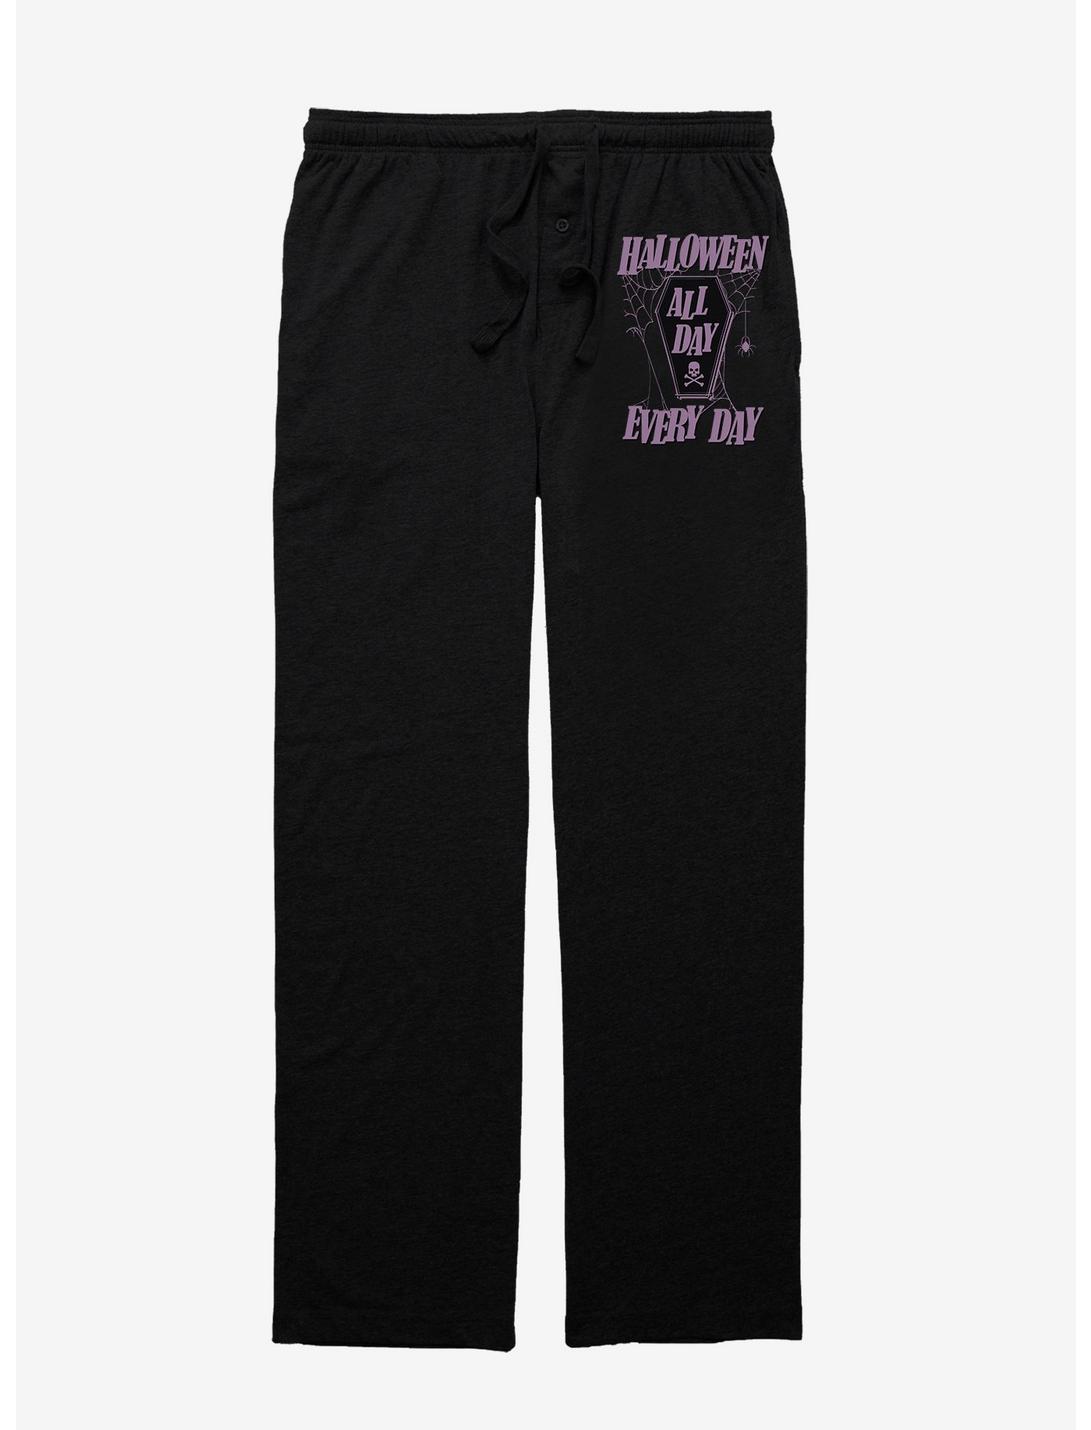 Halloween All Day Every Day Pajama Pants, BLACK, hi-res